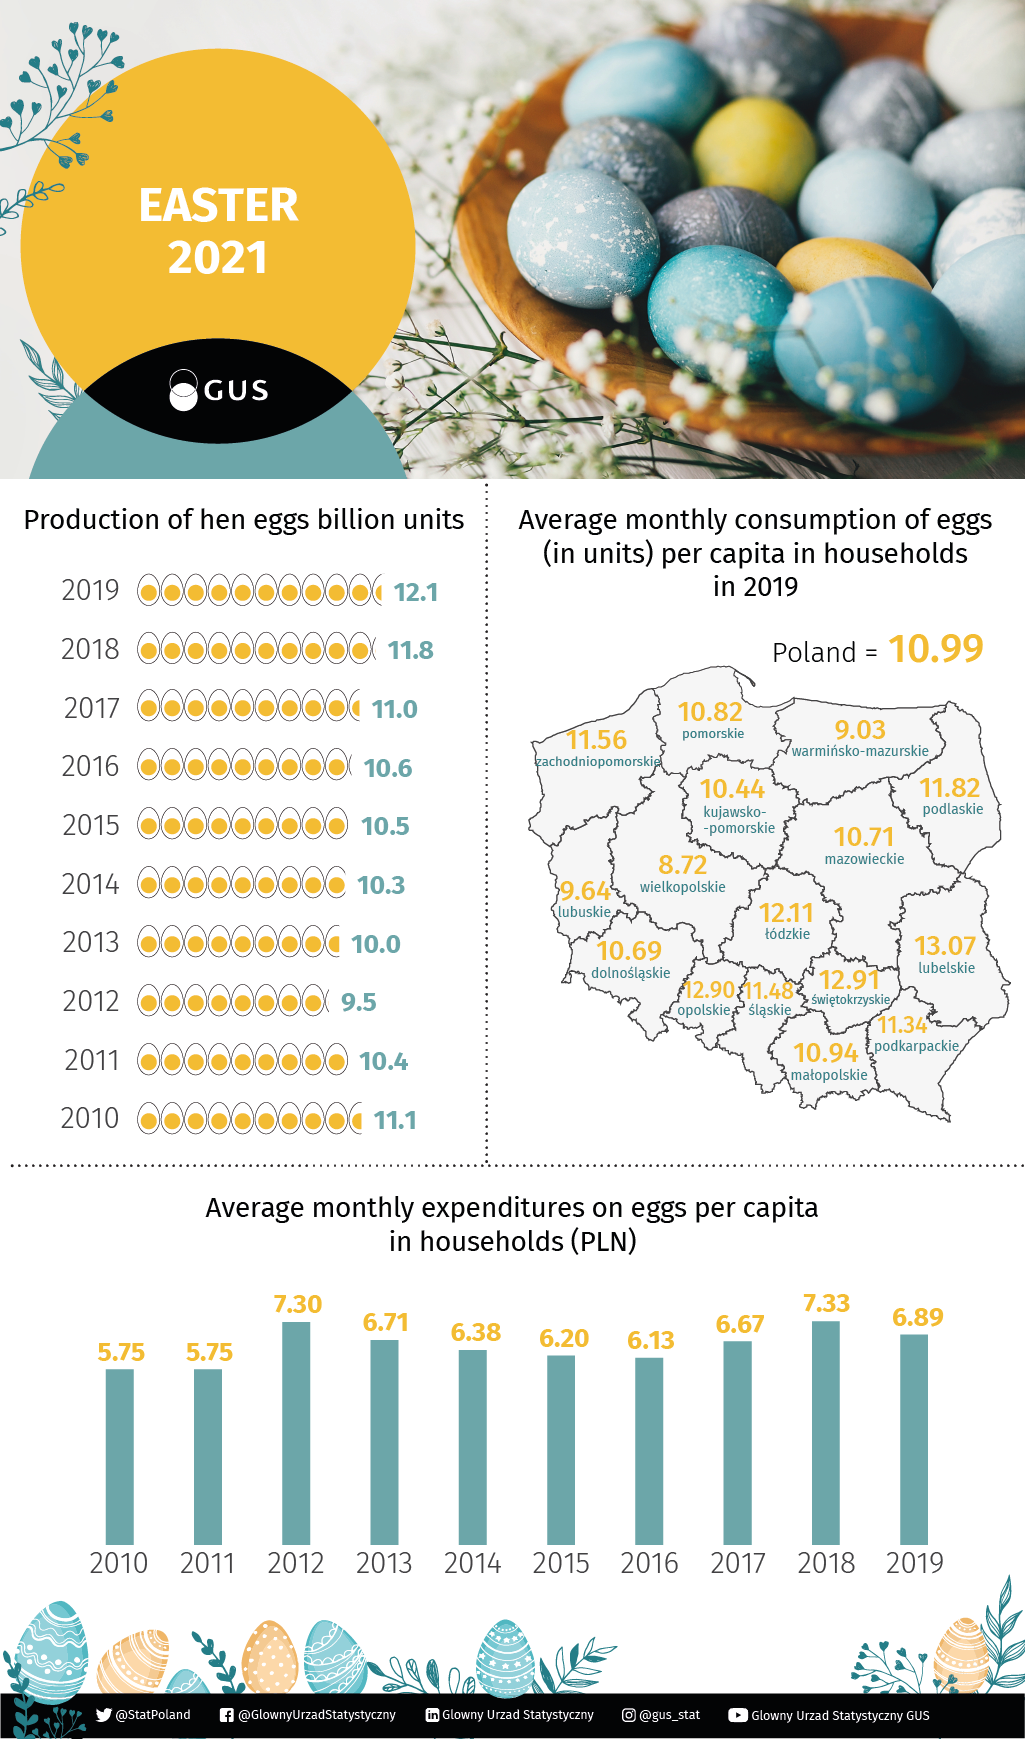 Infographic Easter 2021. Data used in infographic can be found in the XLSX file